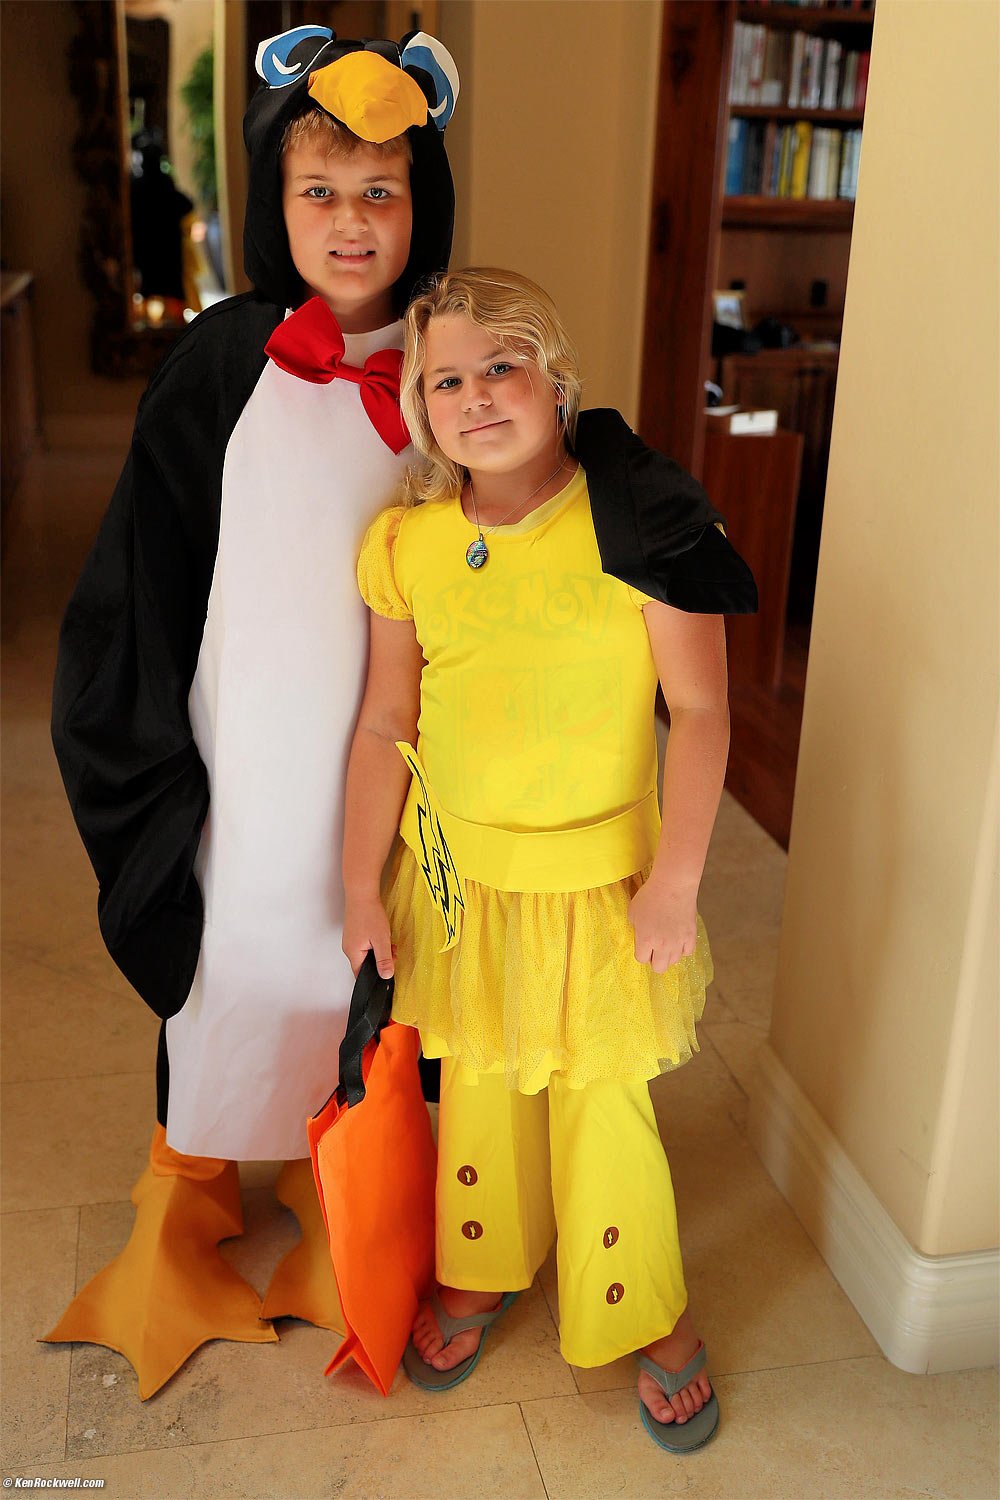 Ryan and Katie in their Halloween costumes